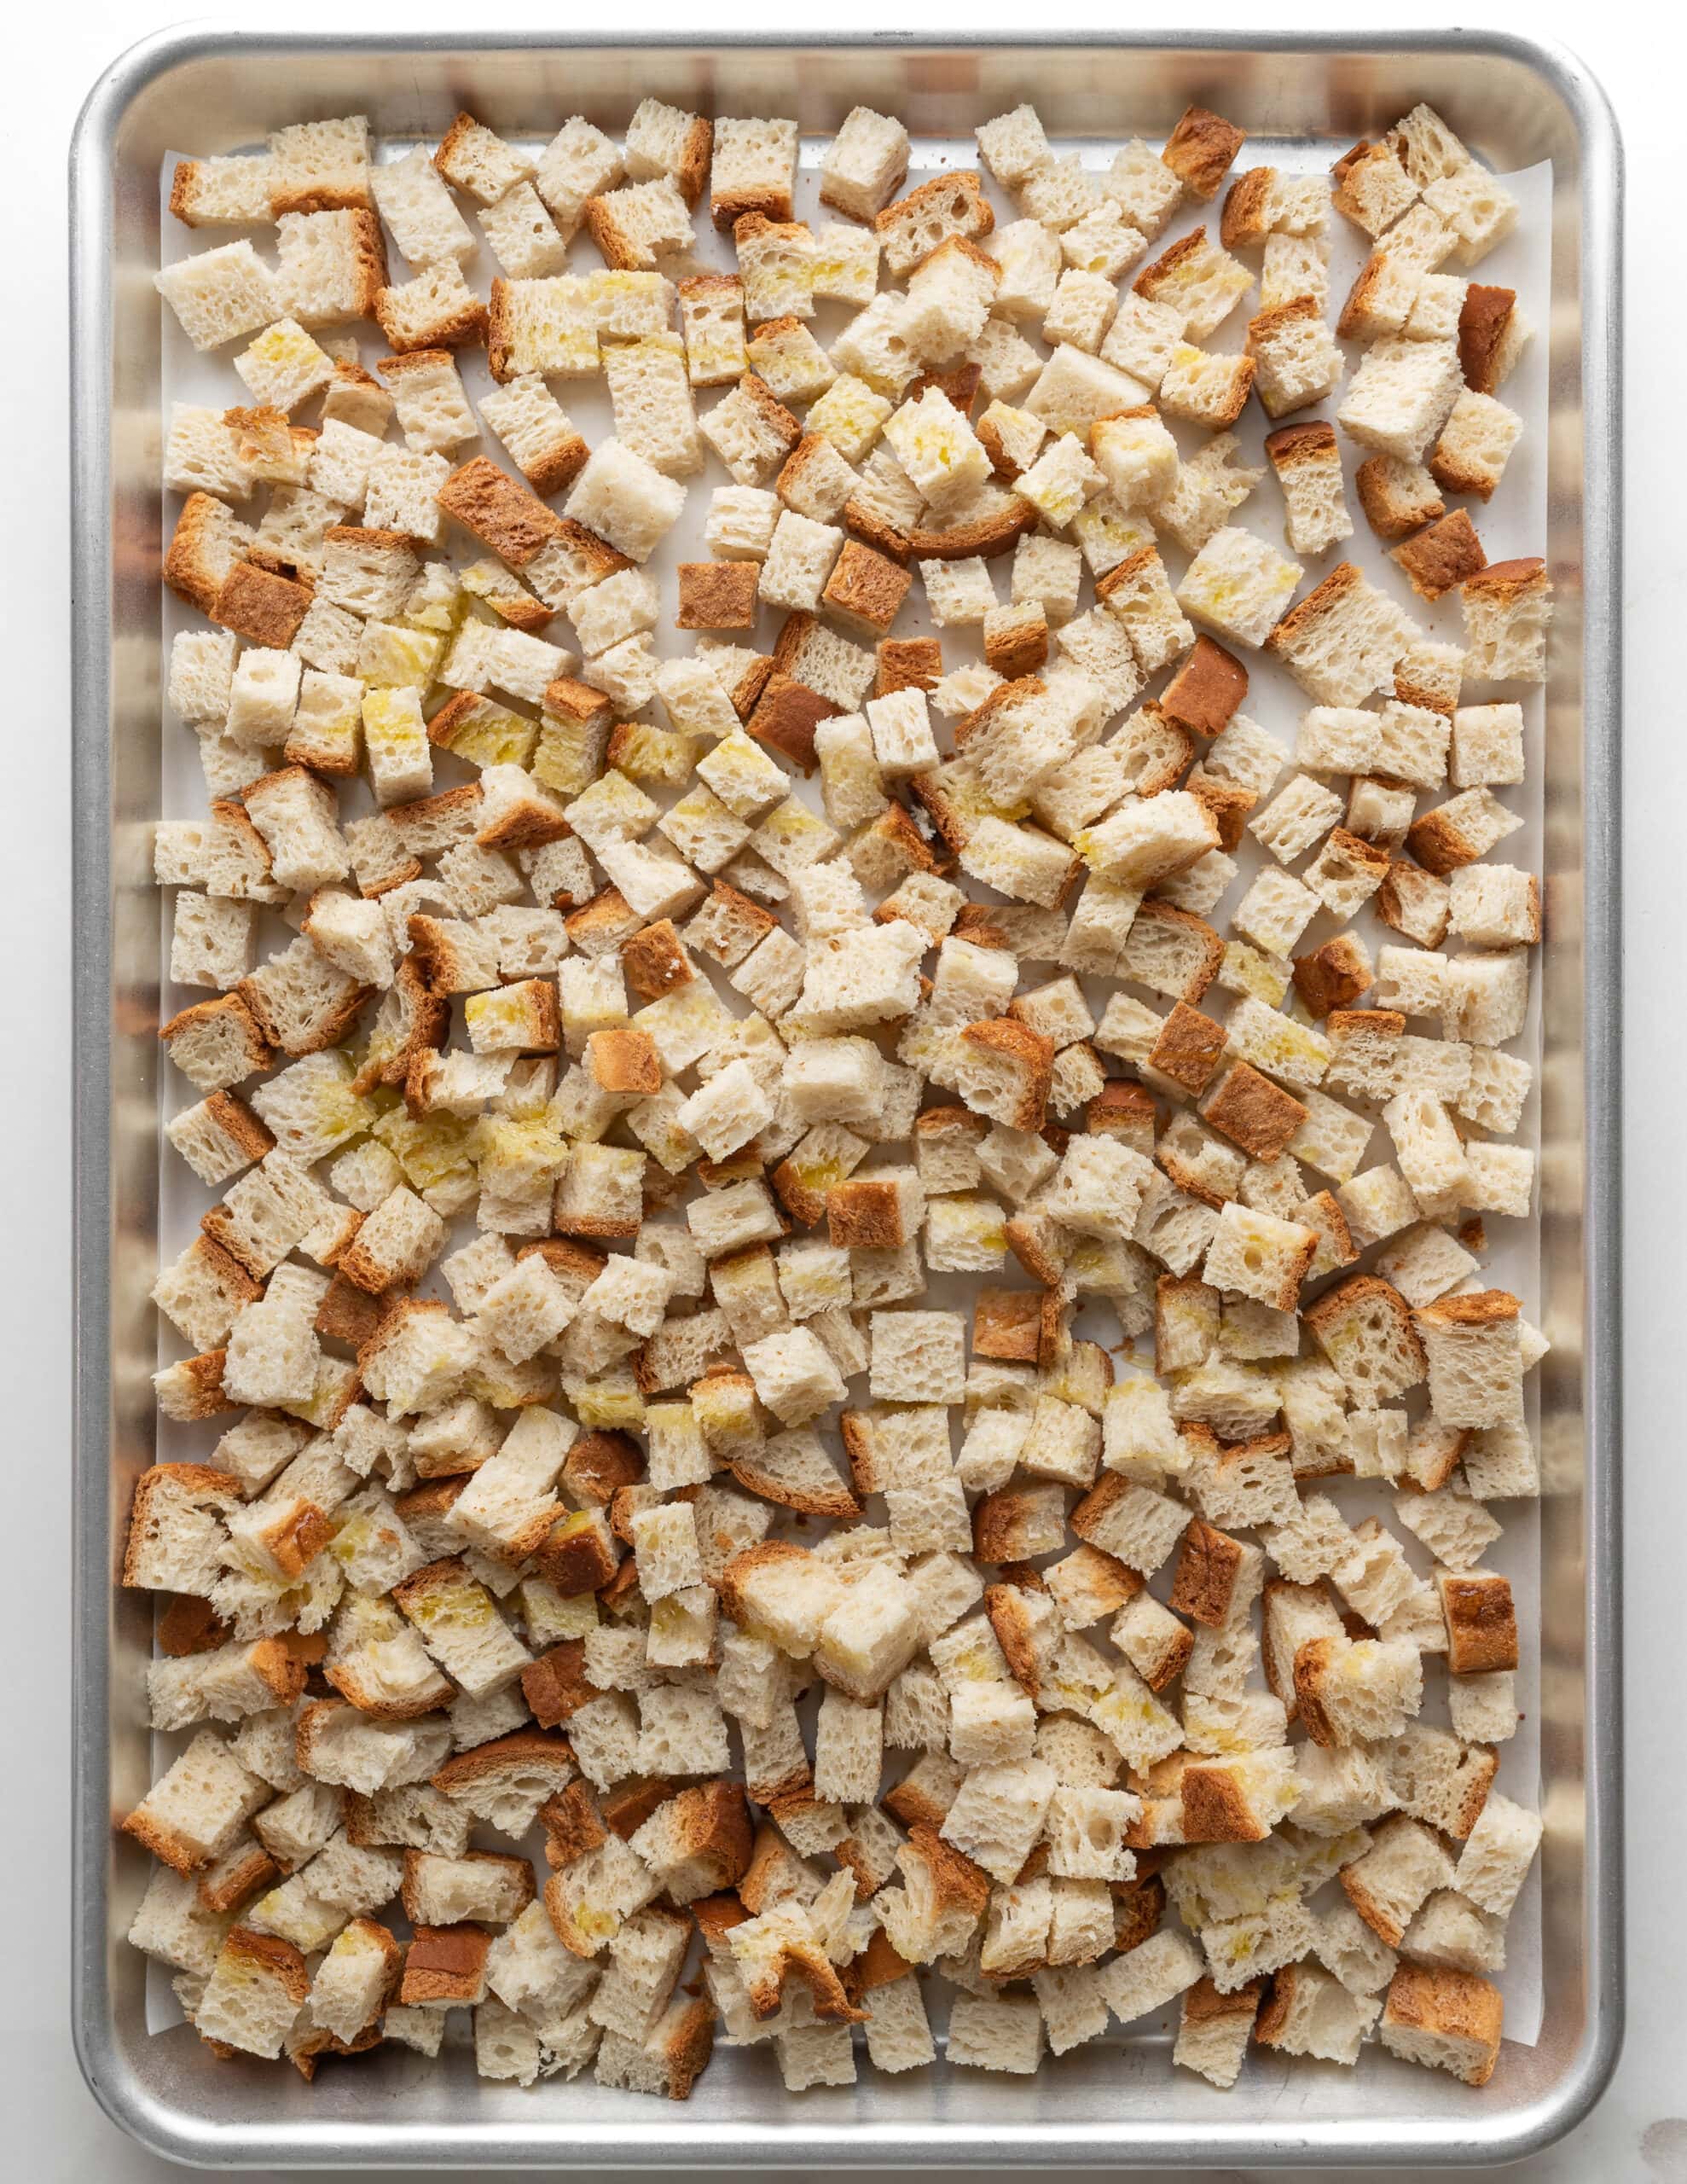 Large silver baking tray with diced bread cubes.